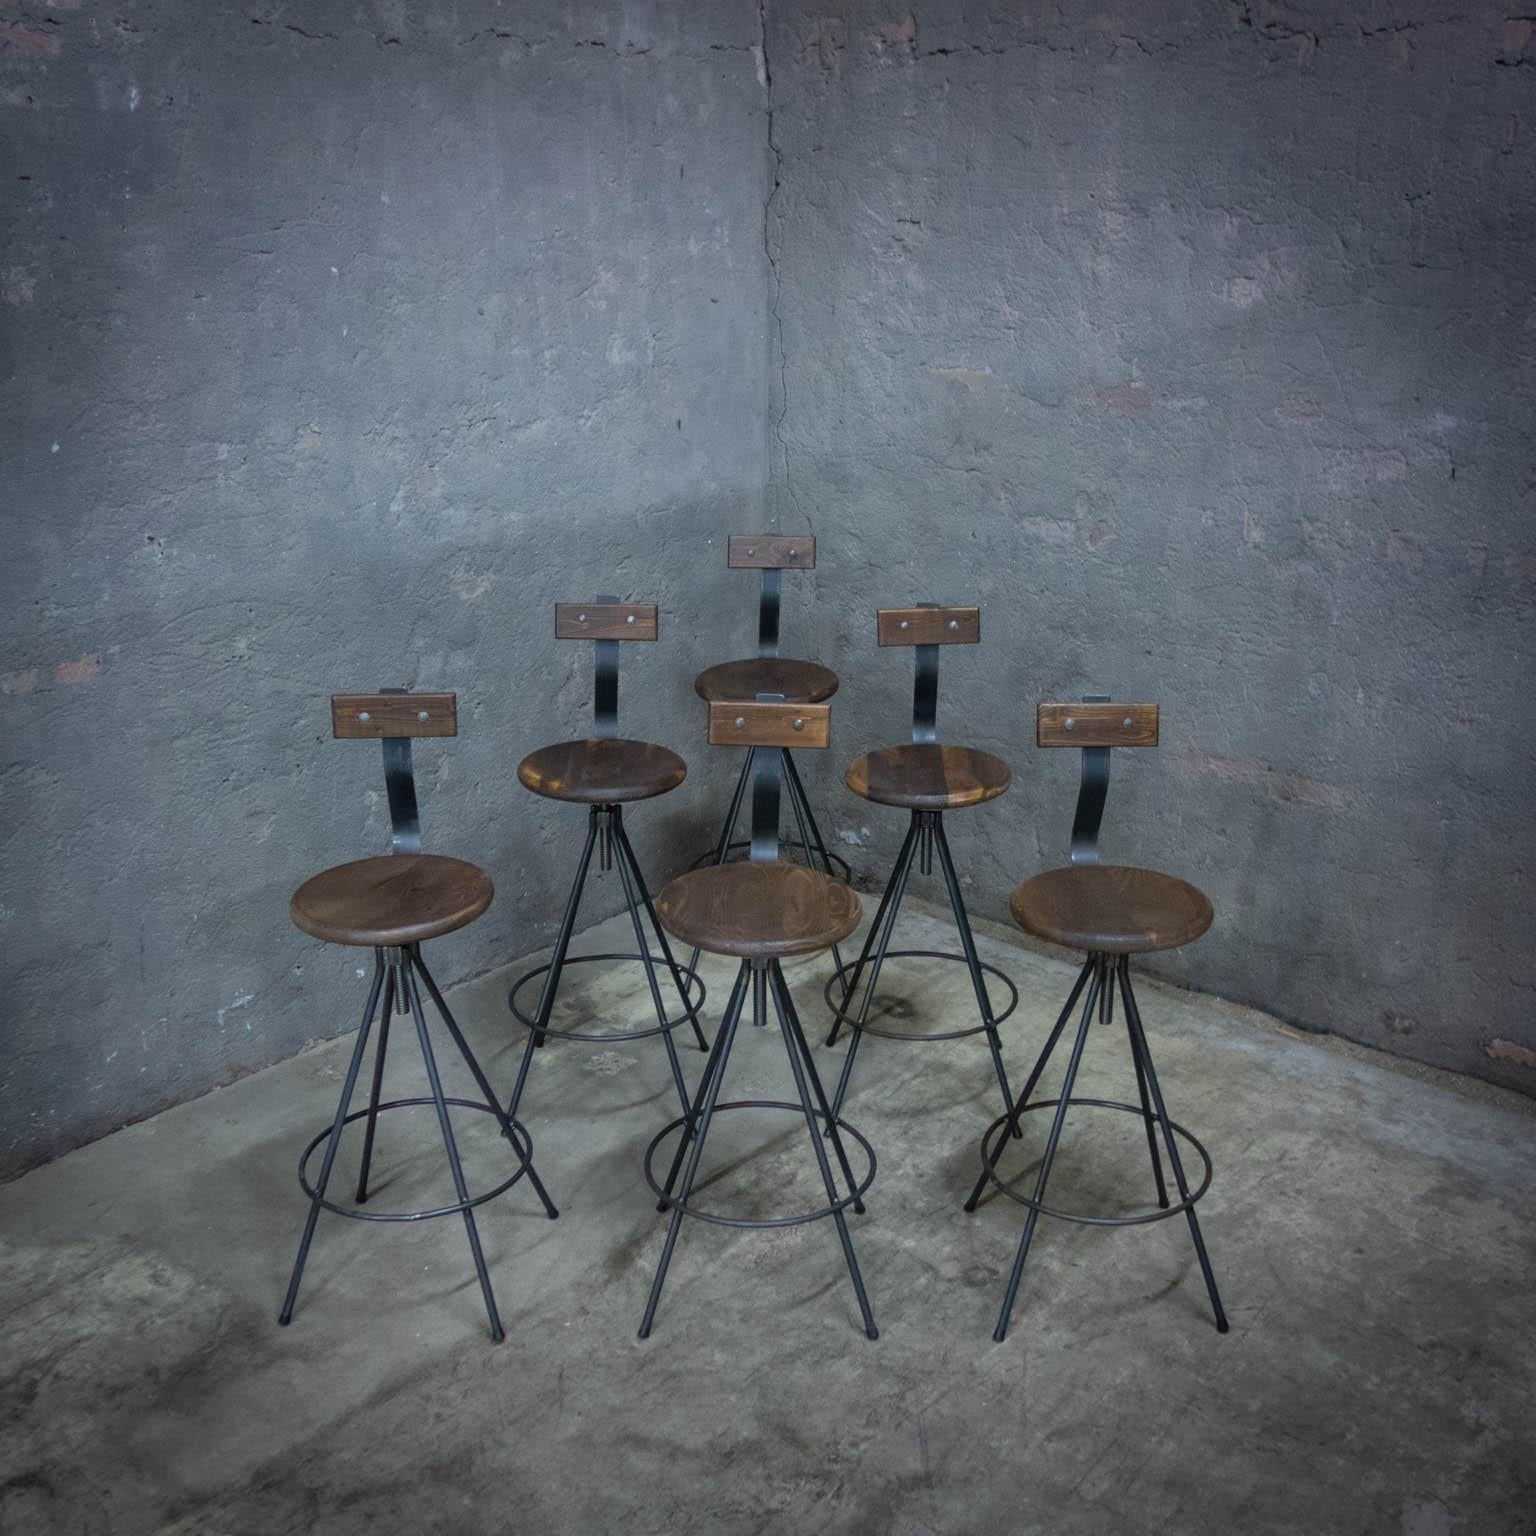 Bar stools made to last! These bar stools are handmade and finished with a protective coat. The seating itself is hand carved and made out of pine, we put special detail into the seating, it's made with round sides and it has depth in the middle.